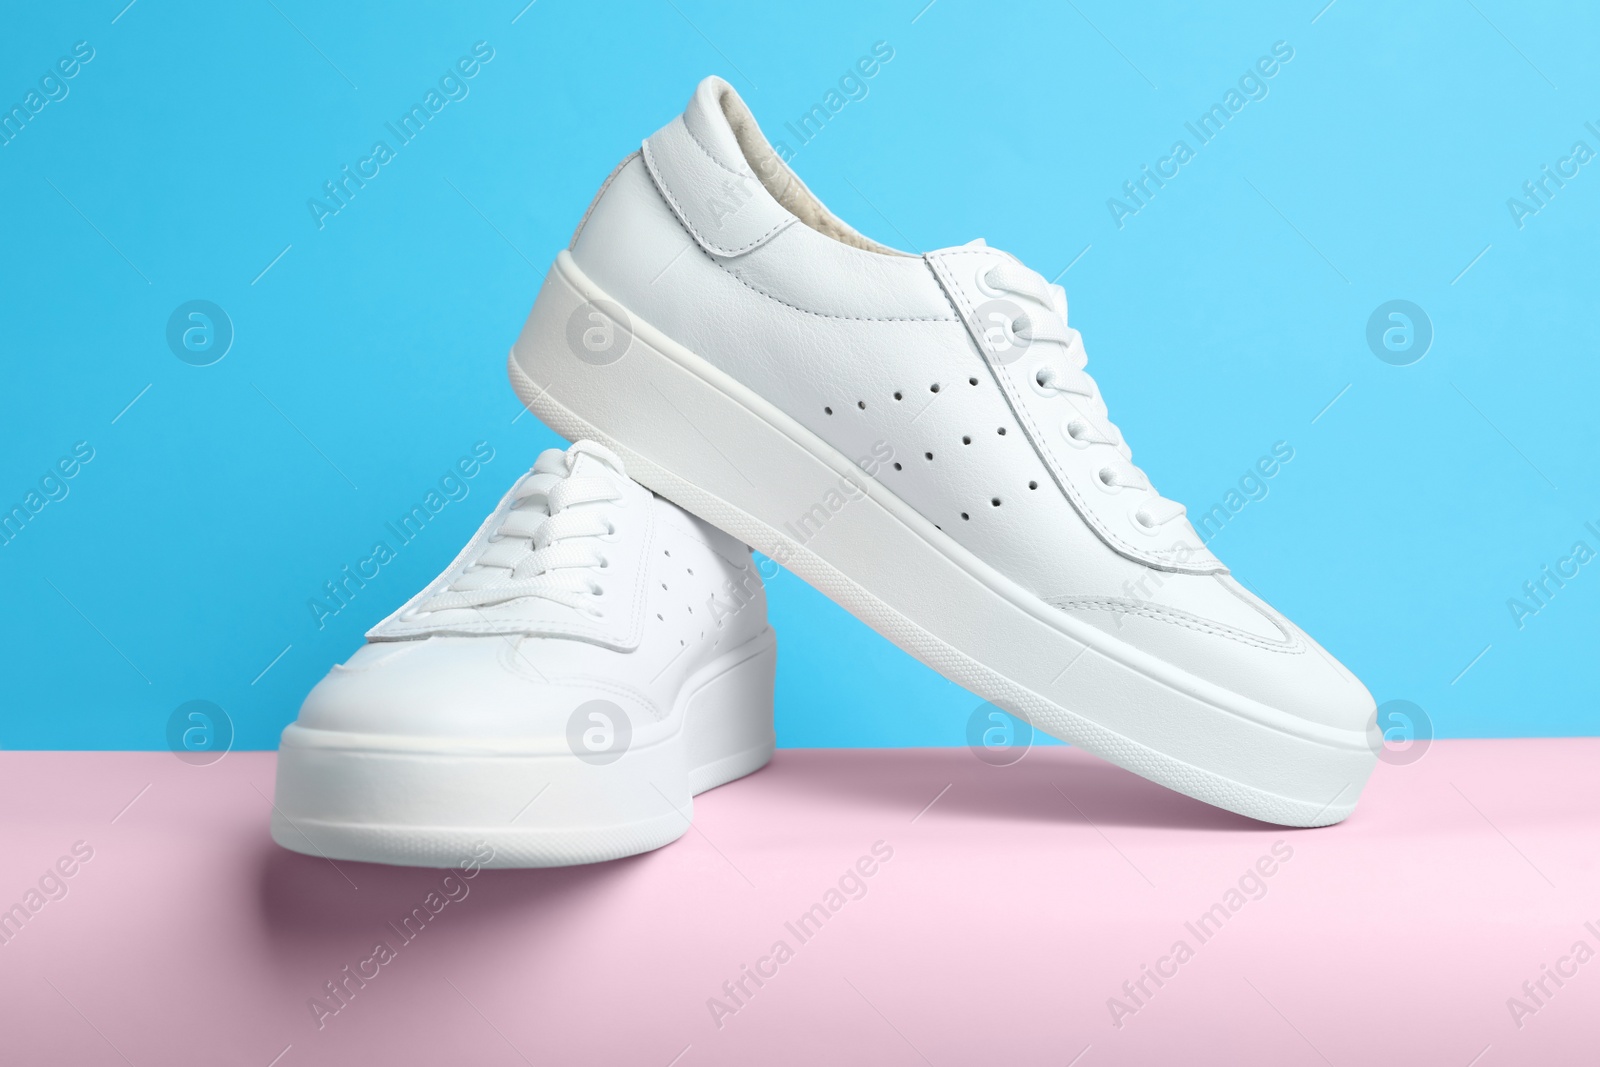 Photo of Stylish white shoes on pink paper against light blue background